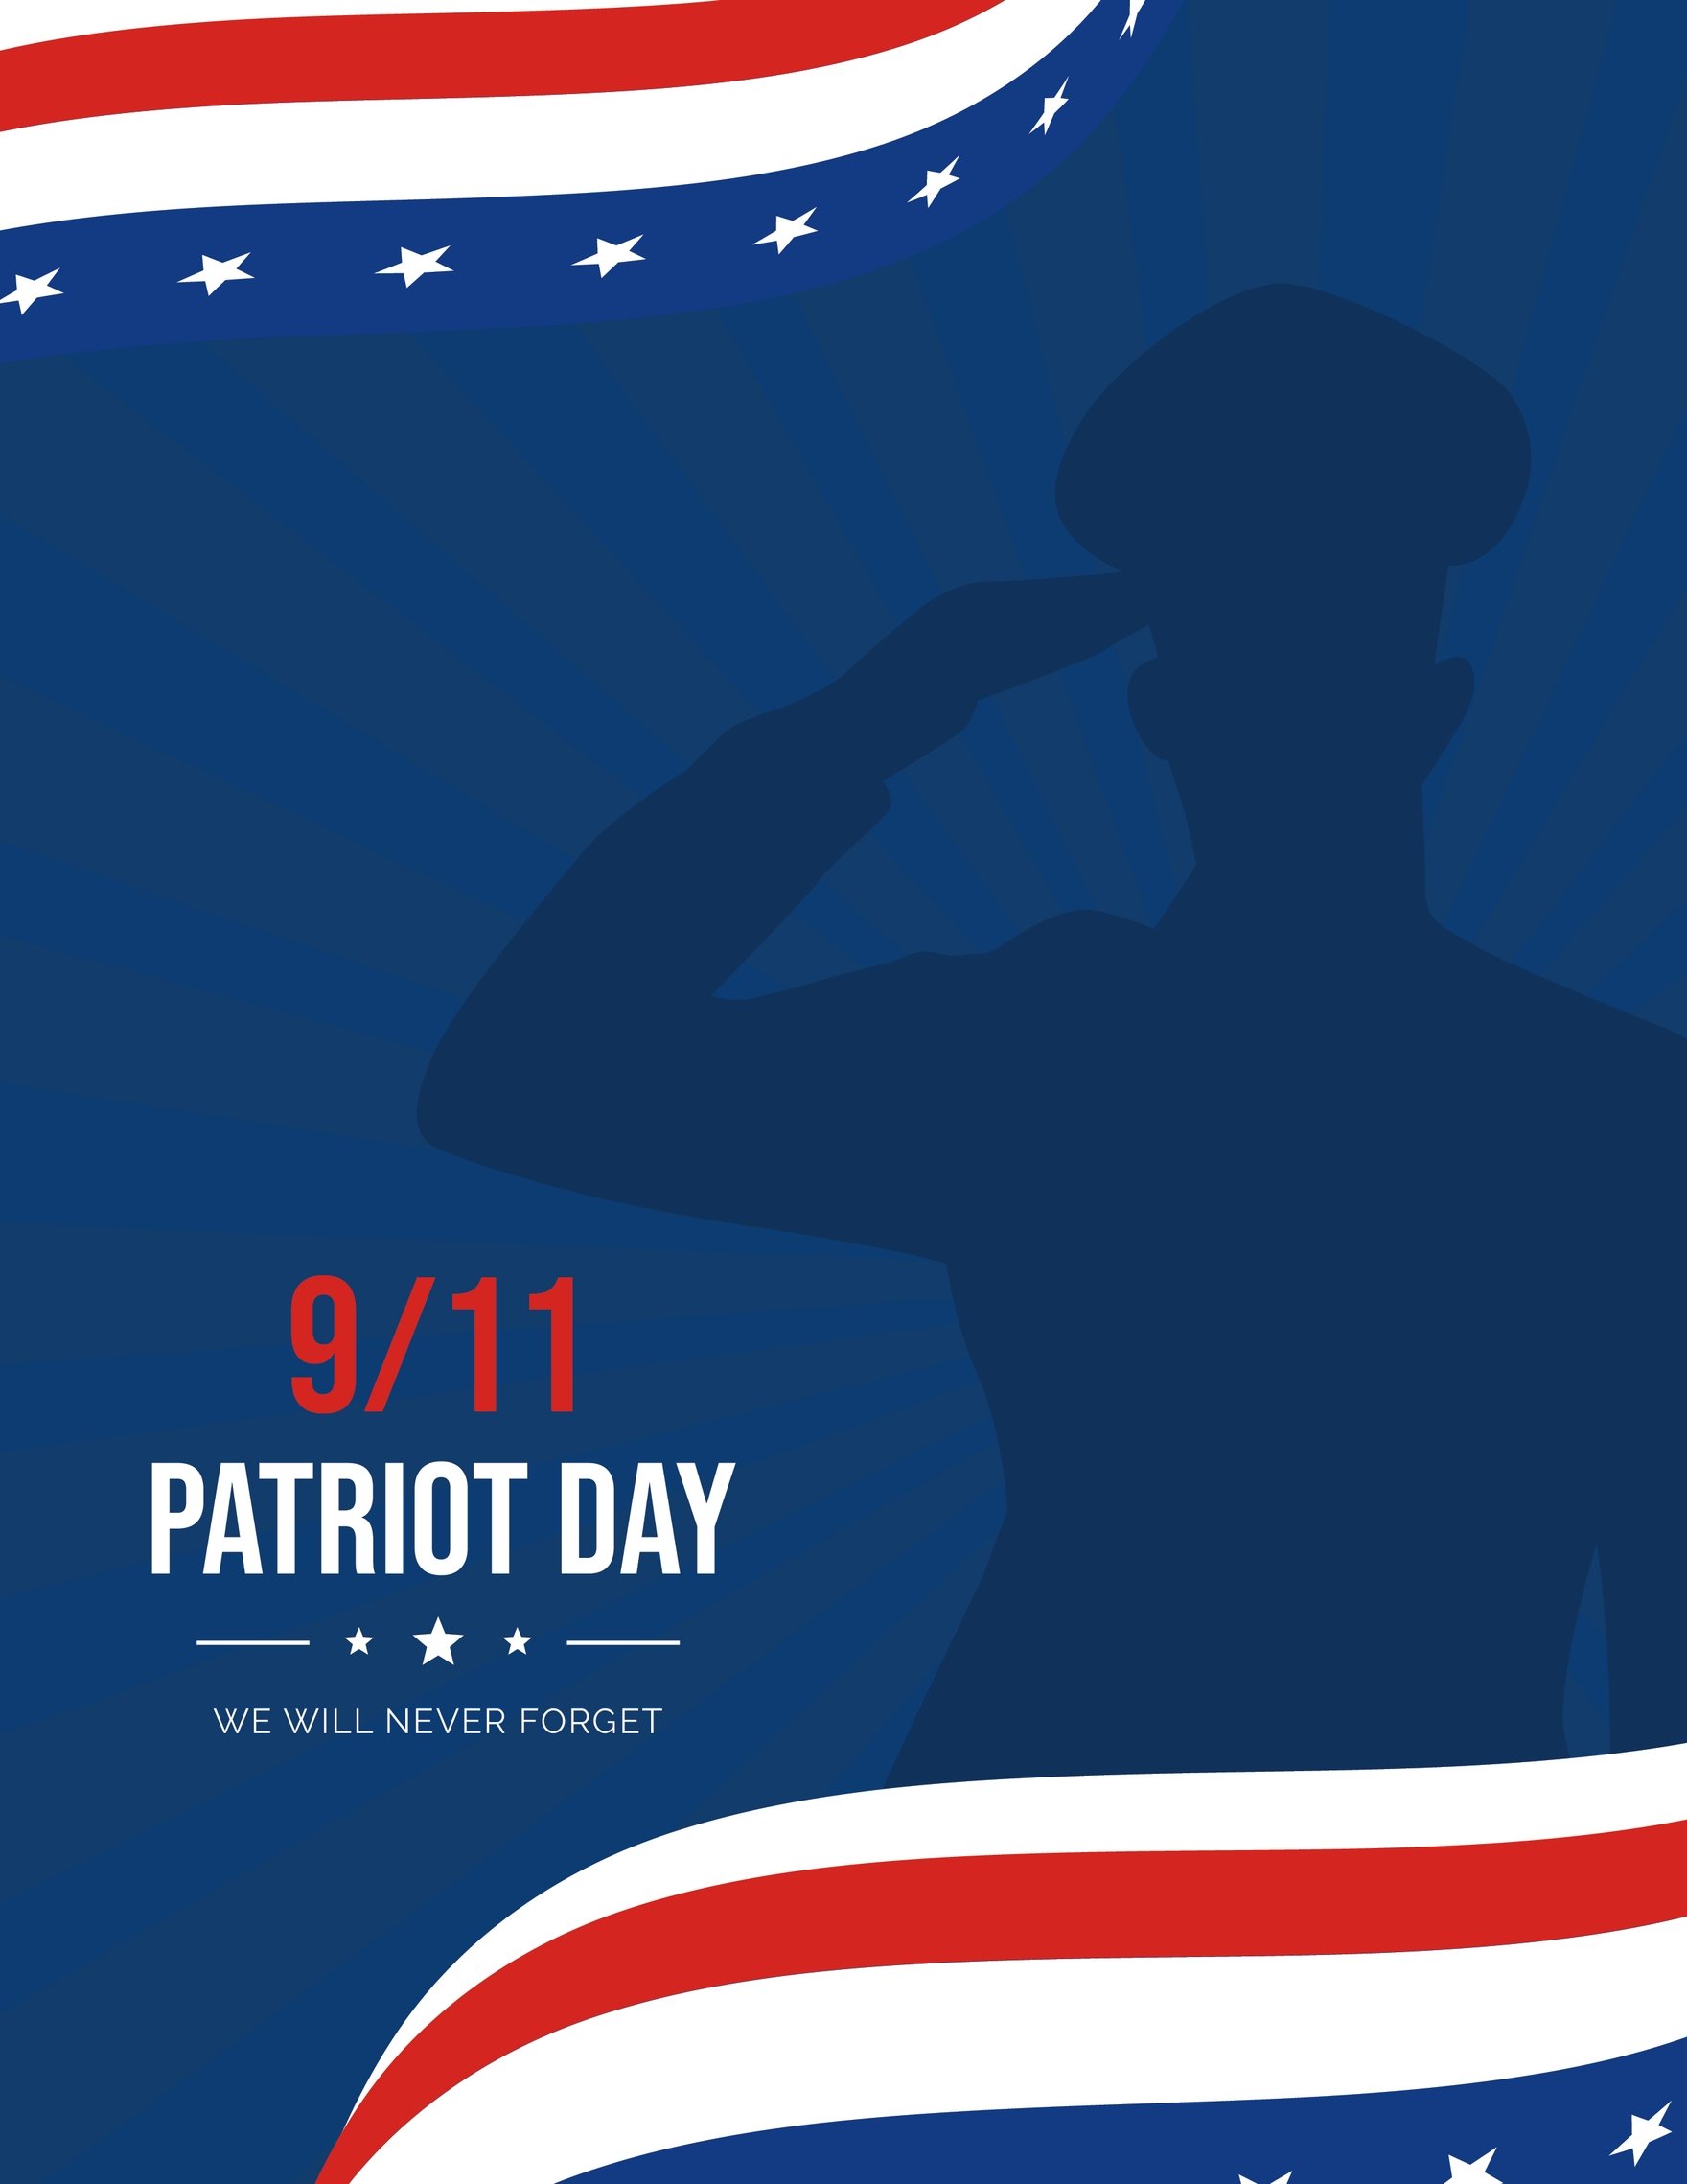 Free We Will Never Forget Patriot Day Flyer Template in Word, Google Docs, Illustrator, PSD, Apple Pages, Publisher